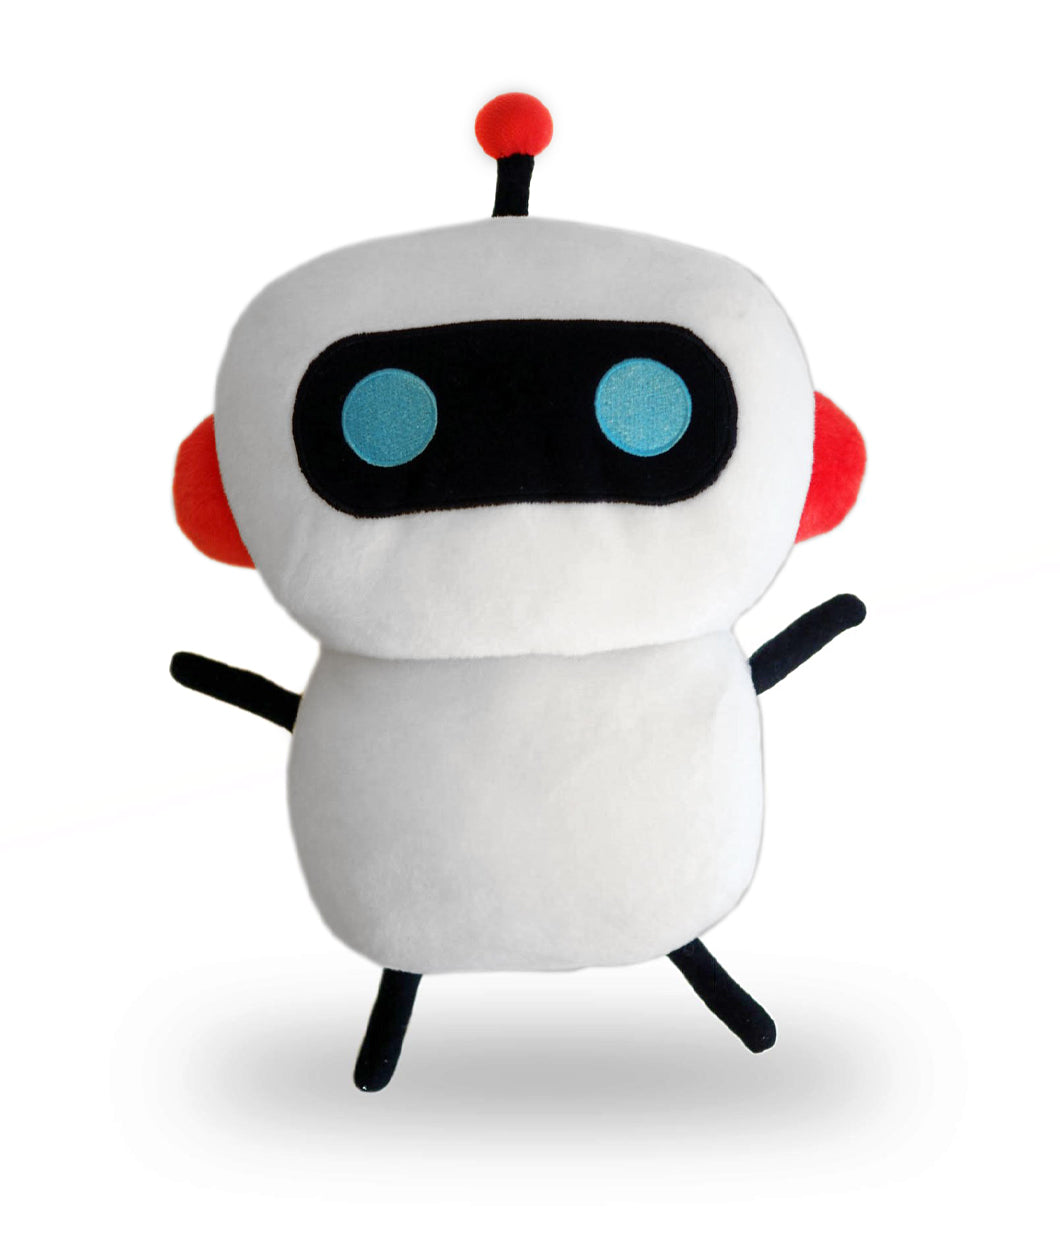 A white robot plushie with thin black arms and legs, red ears, a black antena with a red ball on top, and blue circular eyes surrounded by a large black oval - from CGP Grey.